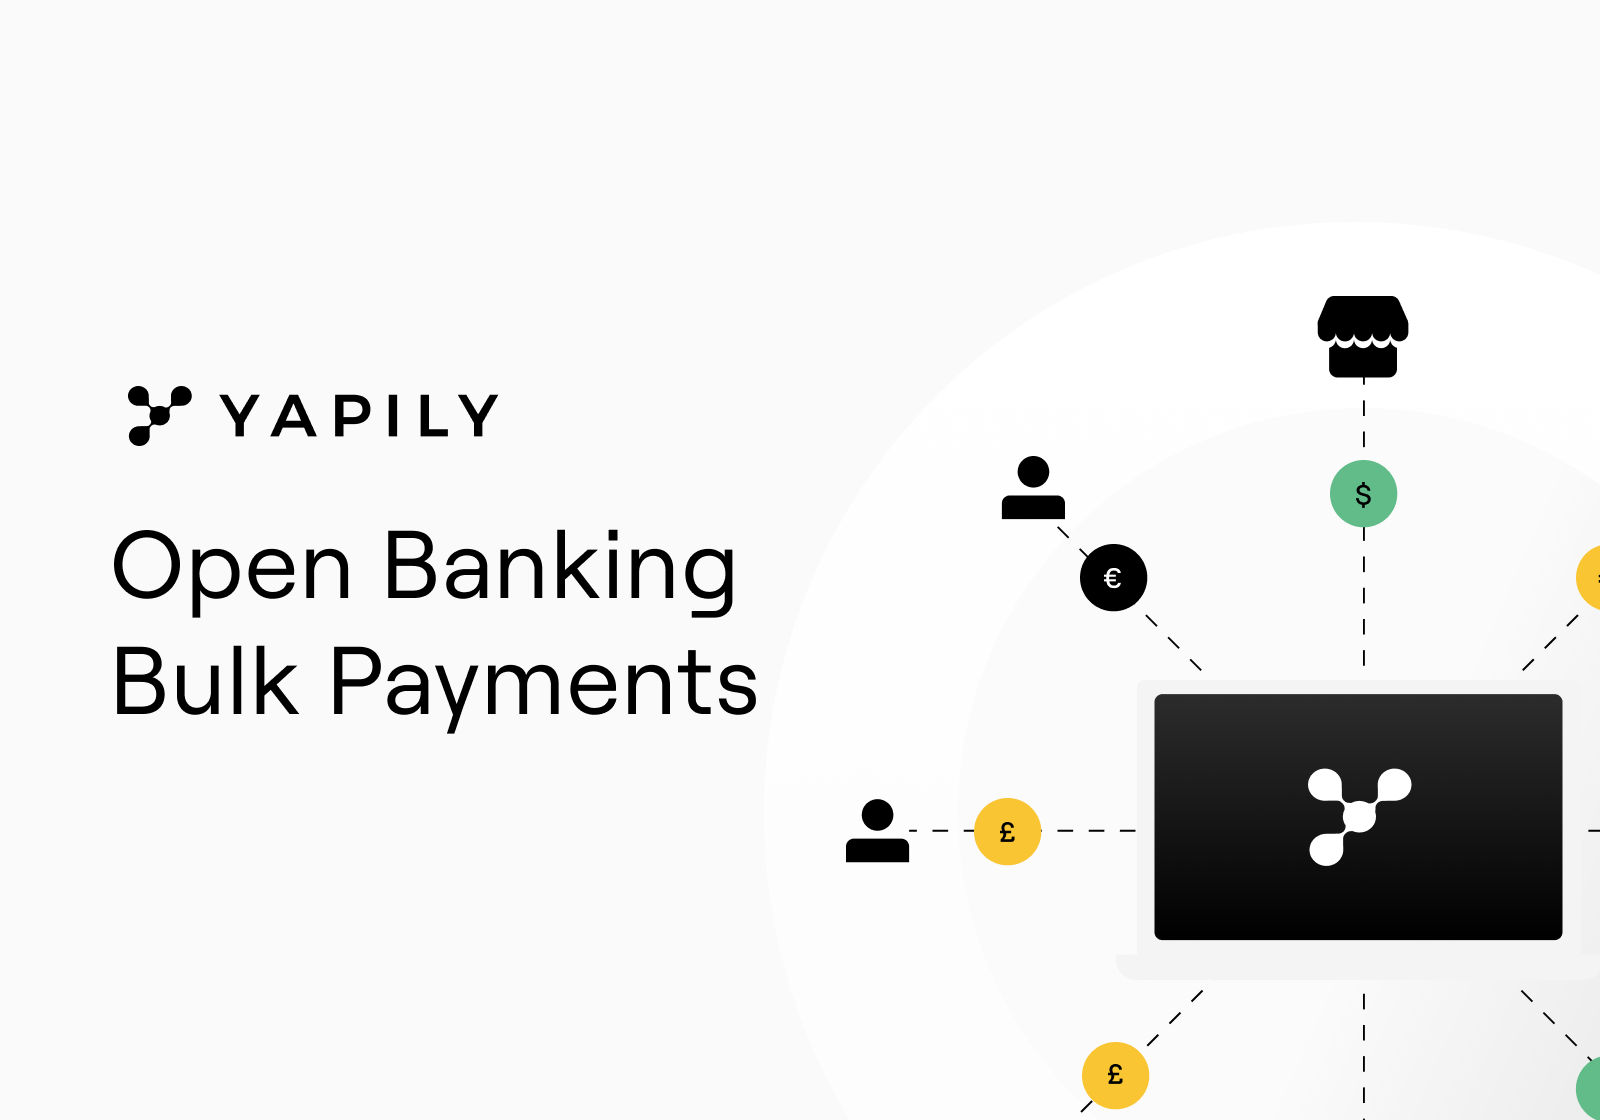 Open Banking bulk payments is here! The Yapily team have worked hard to introduce the Bulk Payments feature and the benefits for firms making payments in bulk or through accounting platforms are endless.